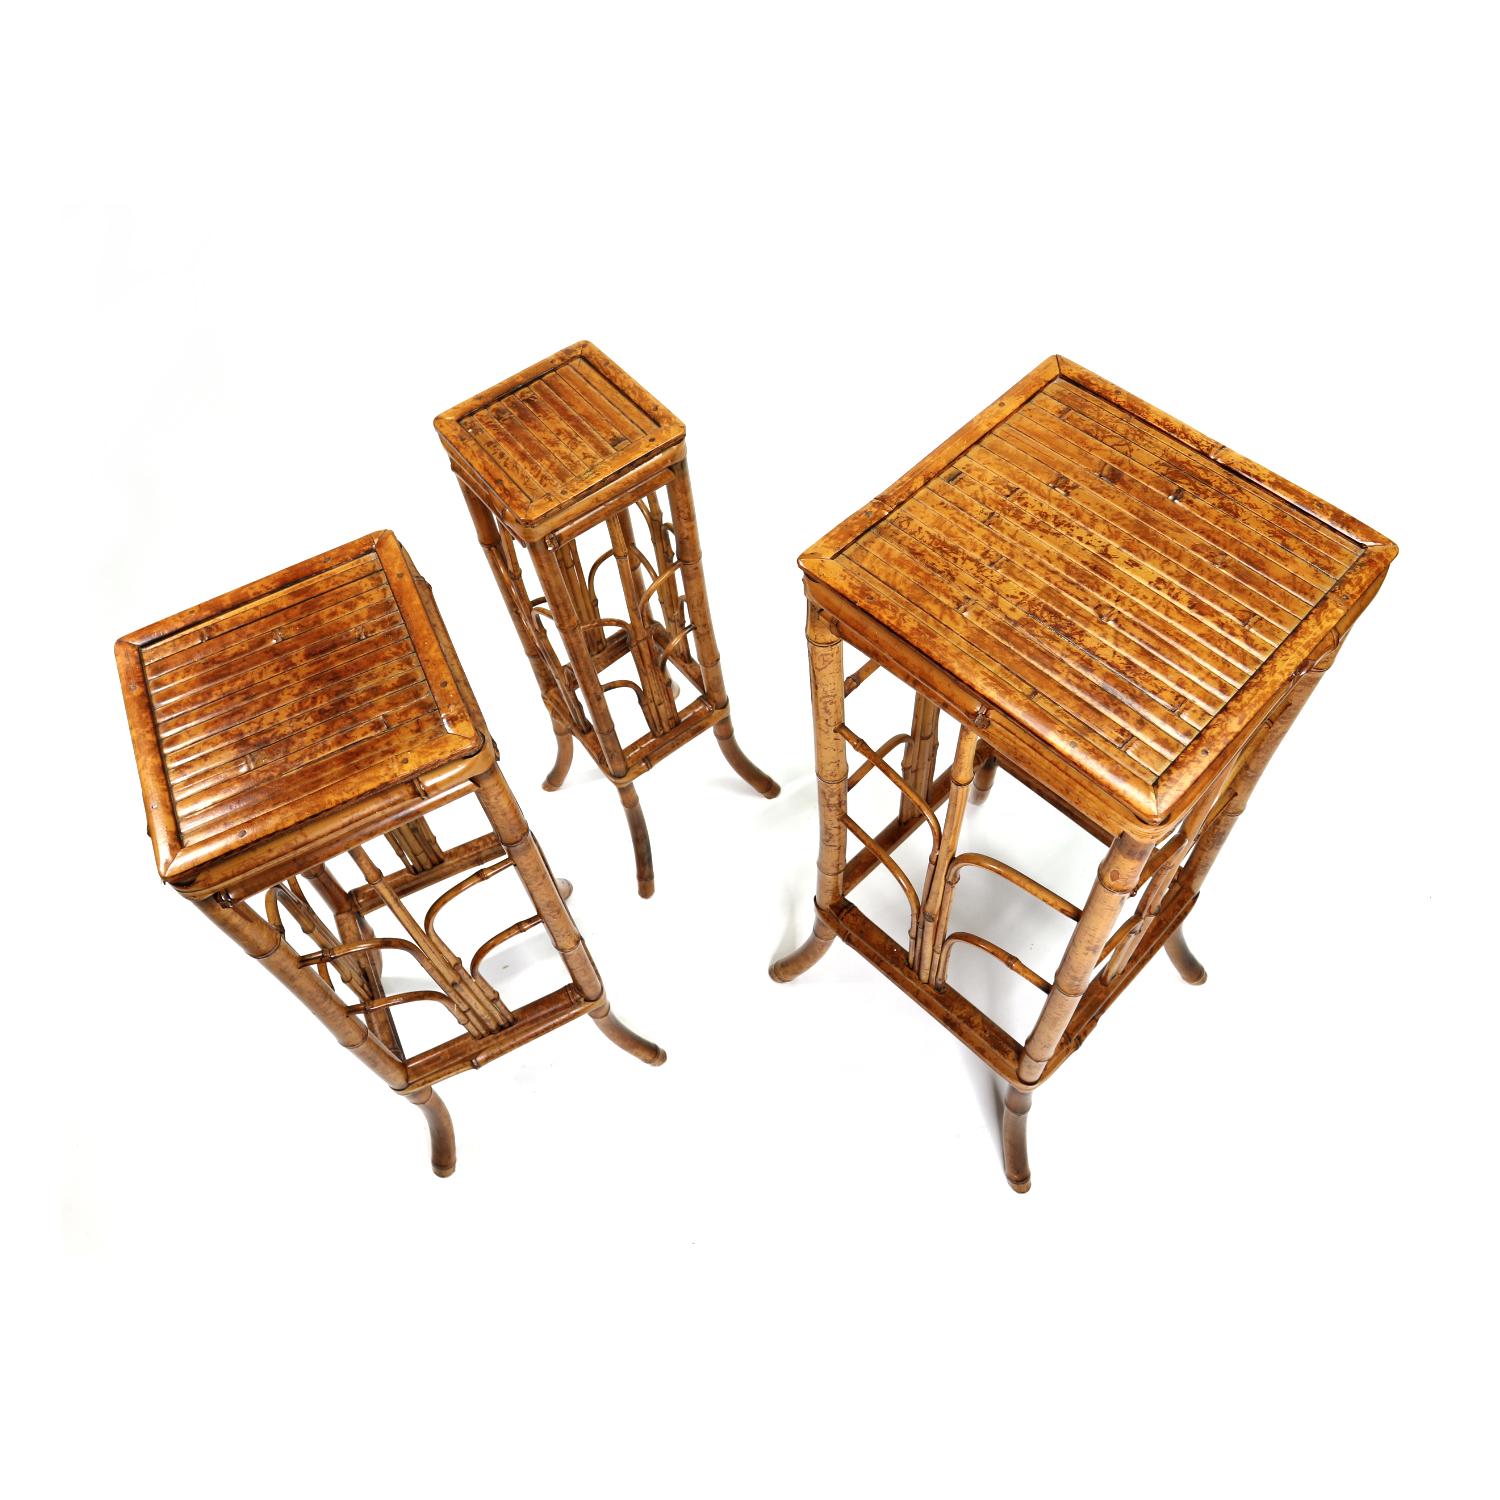 Handsome set of three vintage Bohemian bamboo plant stands. The group consists of three plant stands of graduating size. The trendy boho stands are made of tortoiseshell bamboo. The bamboo gets its name for the unique pattern resembling the back of